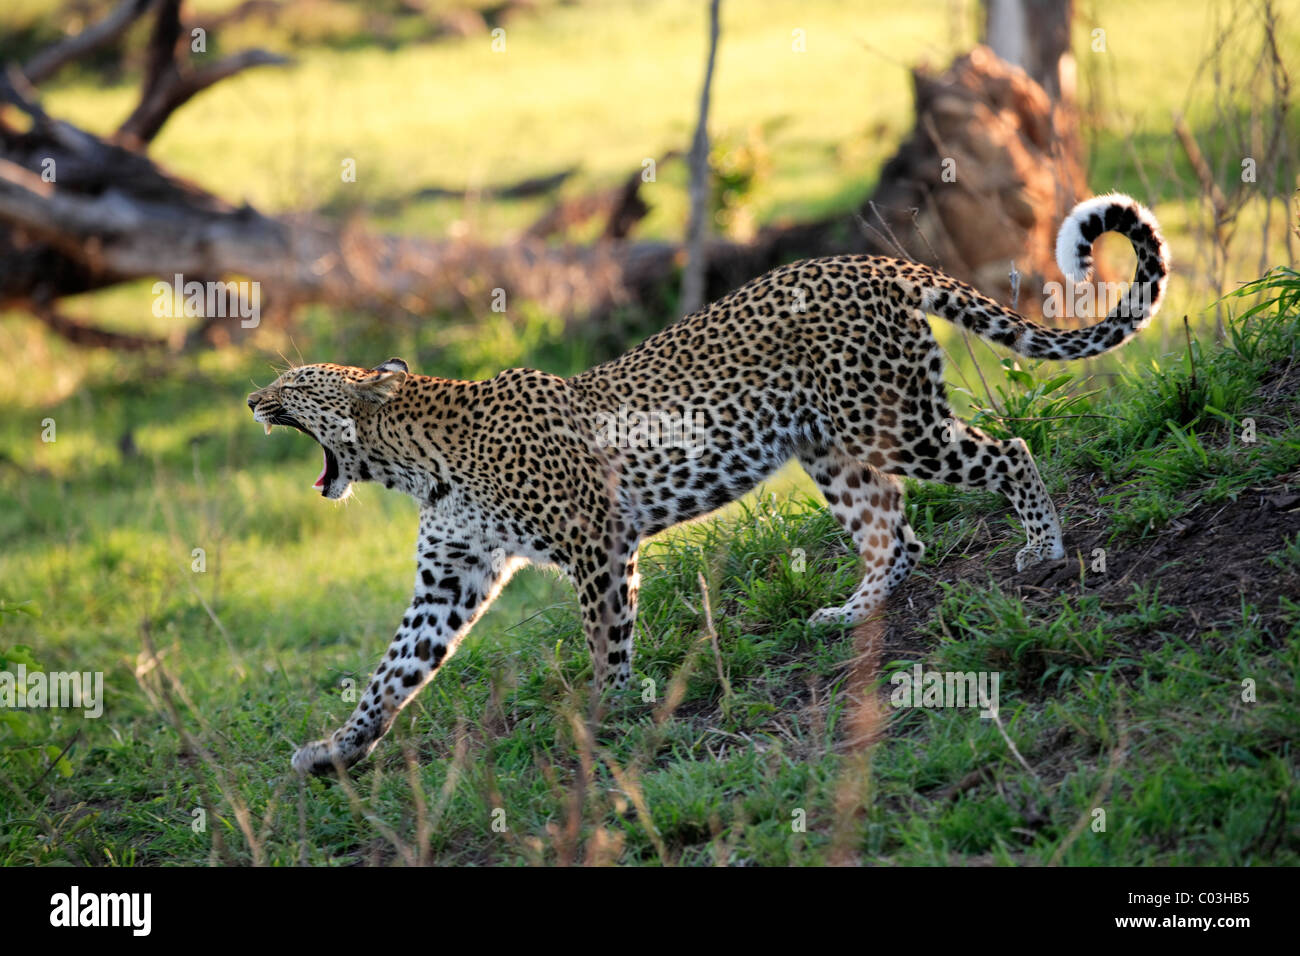 African leopards inspire Chinese `Leopard Fitness' grandpa